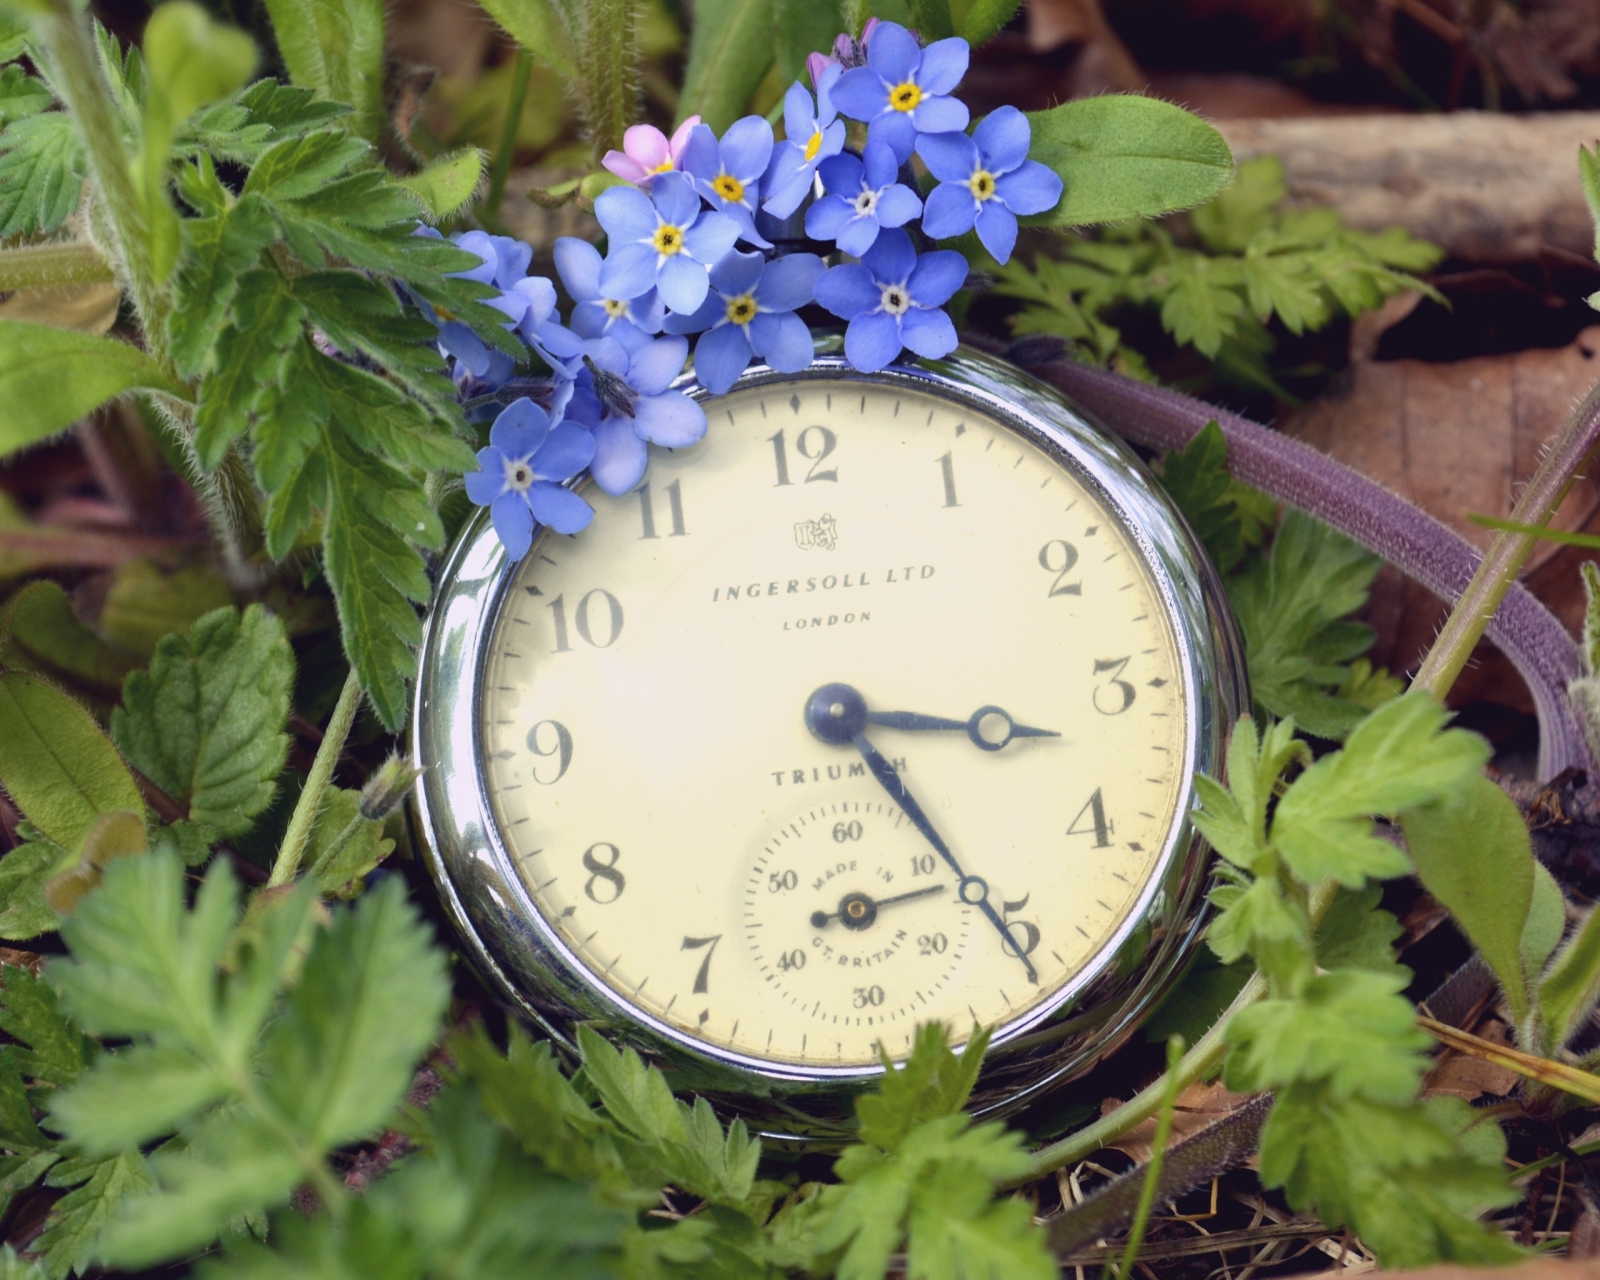 Vintage Watch And Little Blue Flowers wallpaper 1600x1280